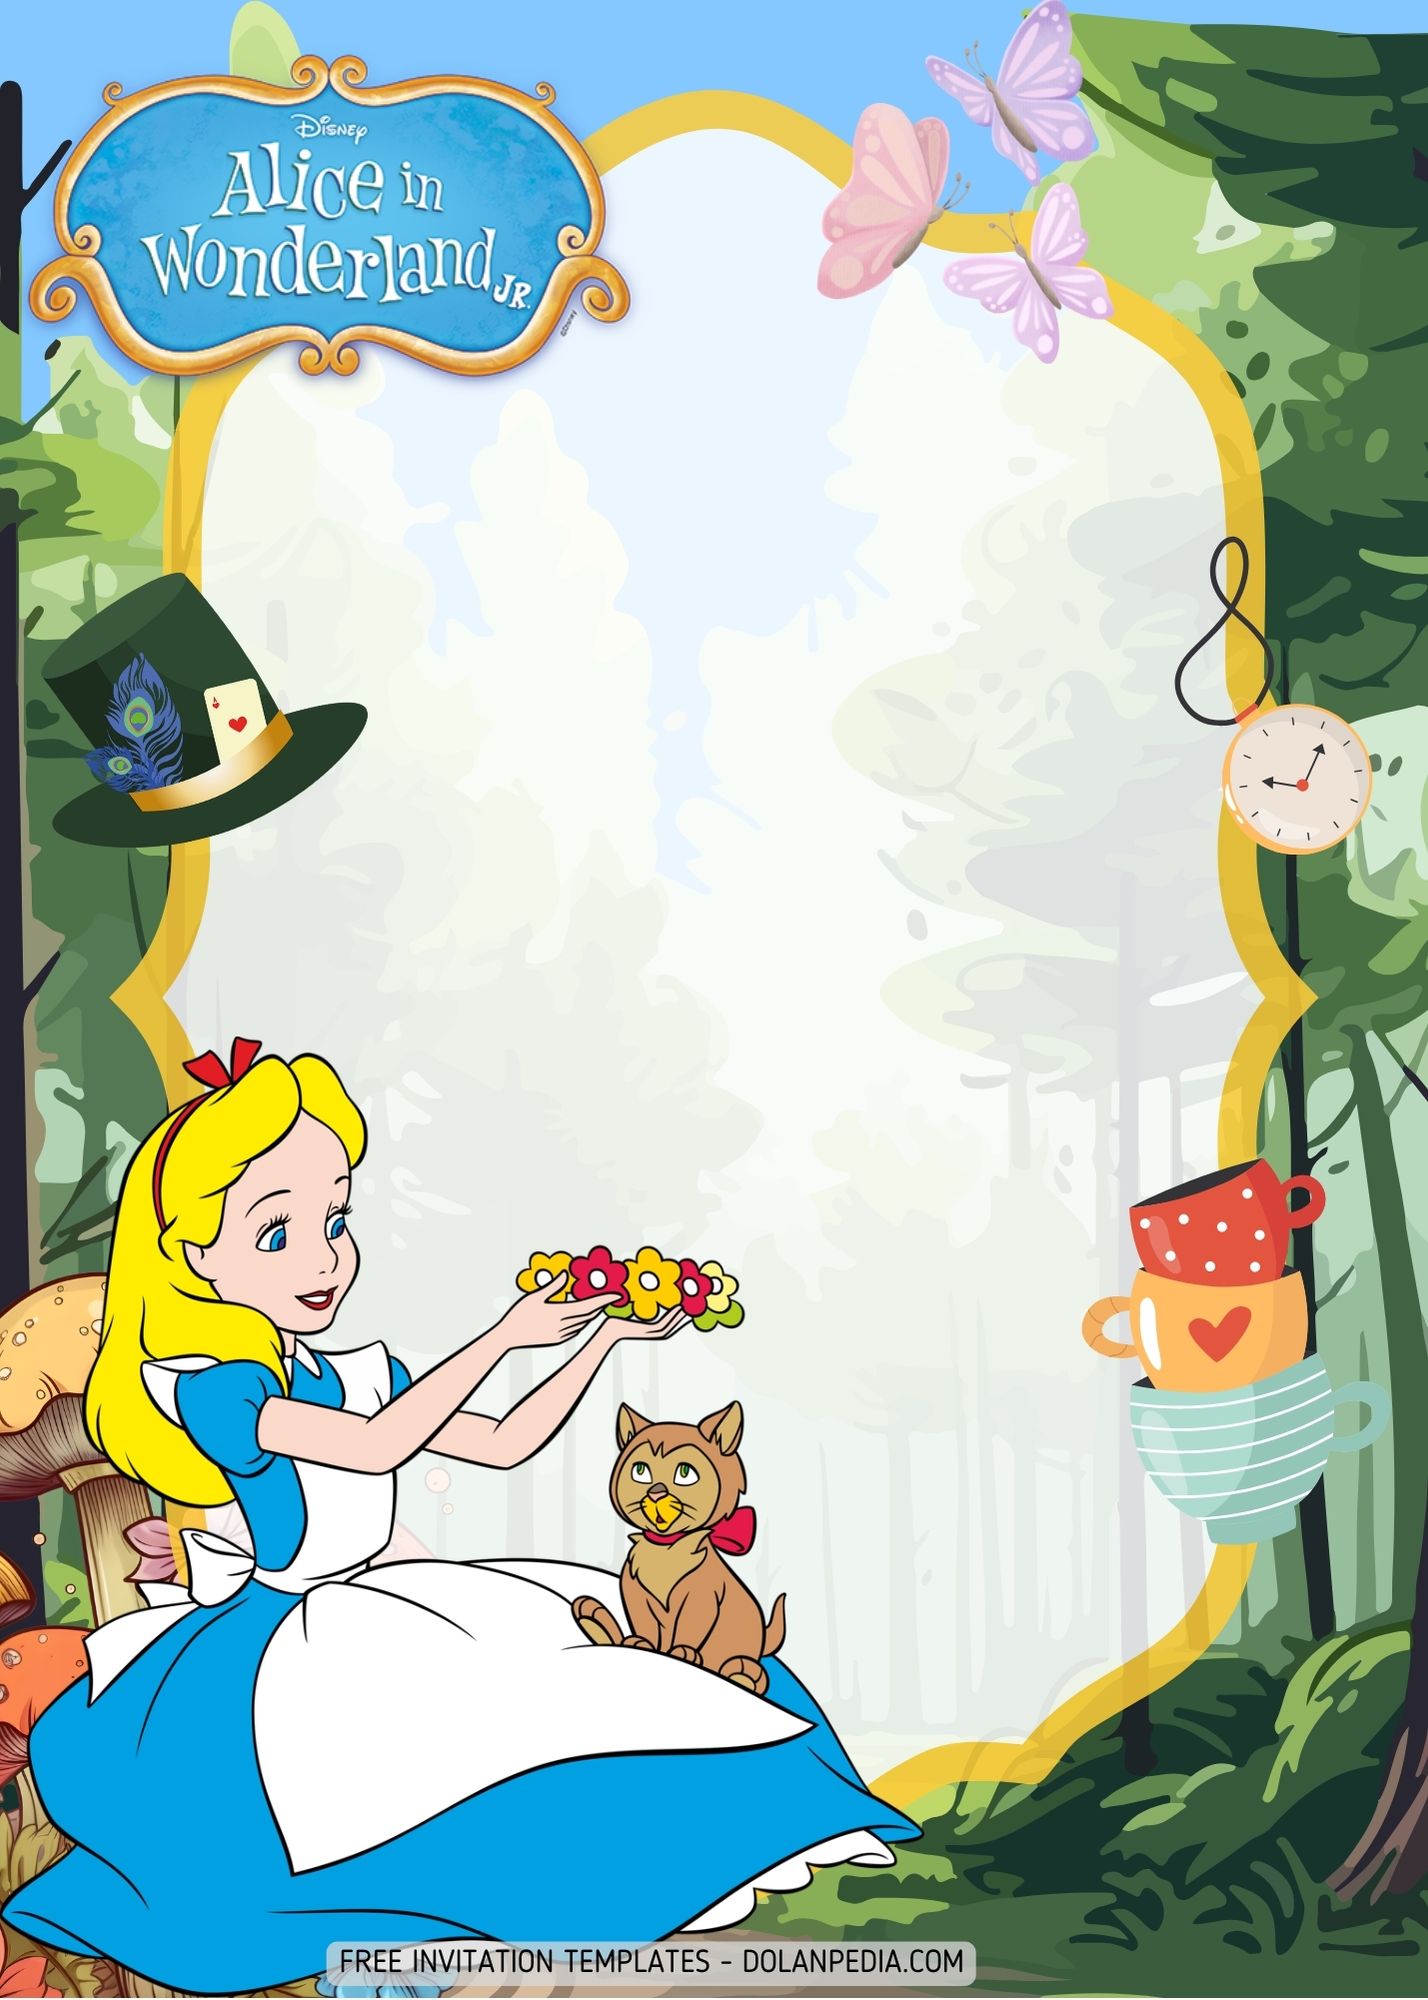 FREE Alice in Wonderland Mad Hatter's Tea Party Invitation Templates